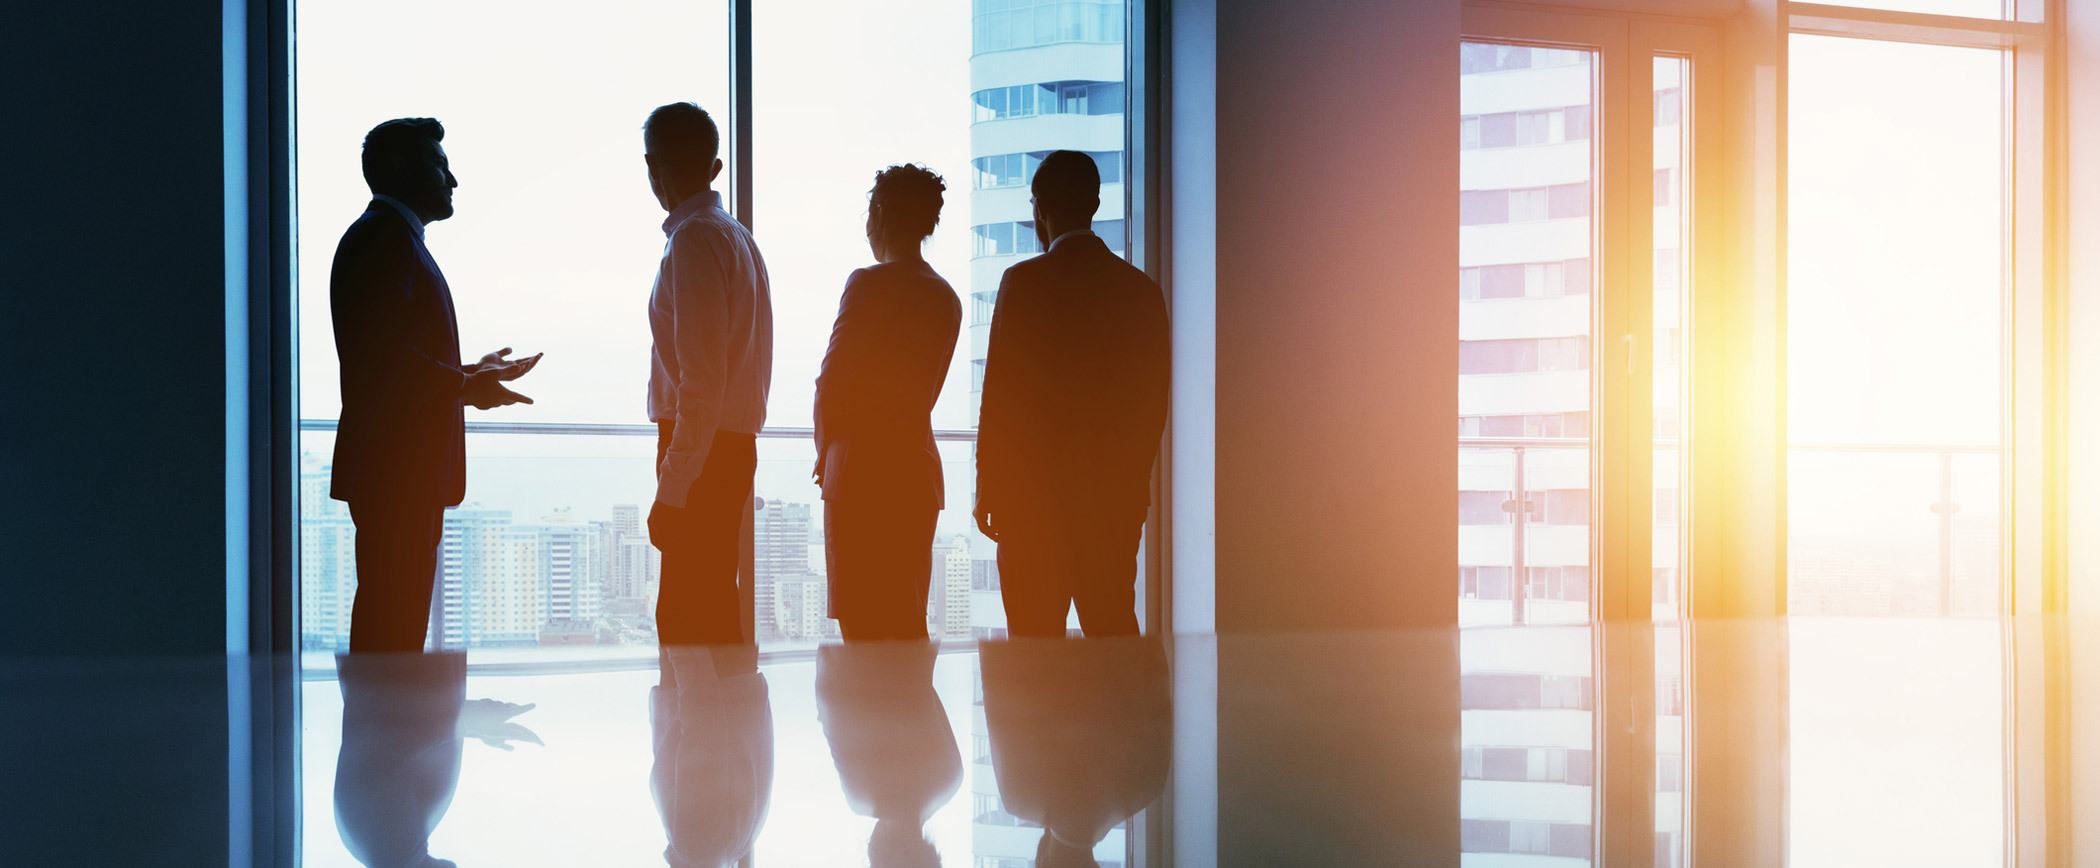 Silhouettes of four business professionals standing and conversing in front of large windows in a modern office setting. The cityscape is visible through the windows, and sunlight is streaming into the room, creating a bright and professional atmosphere.